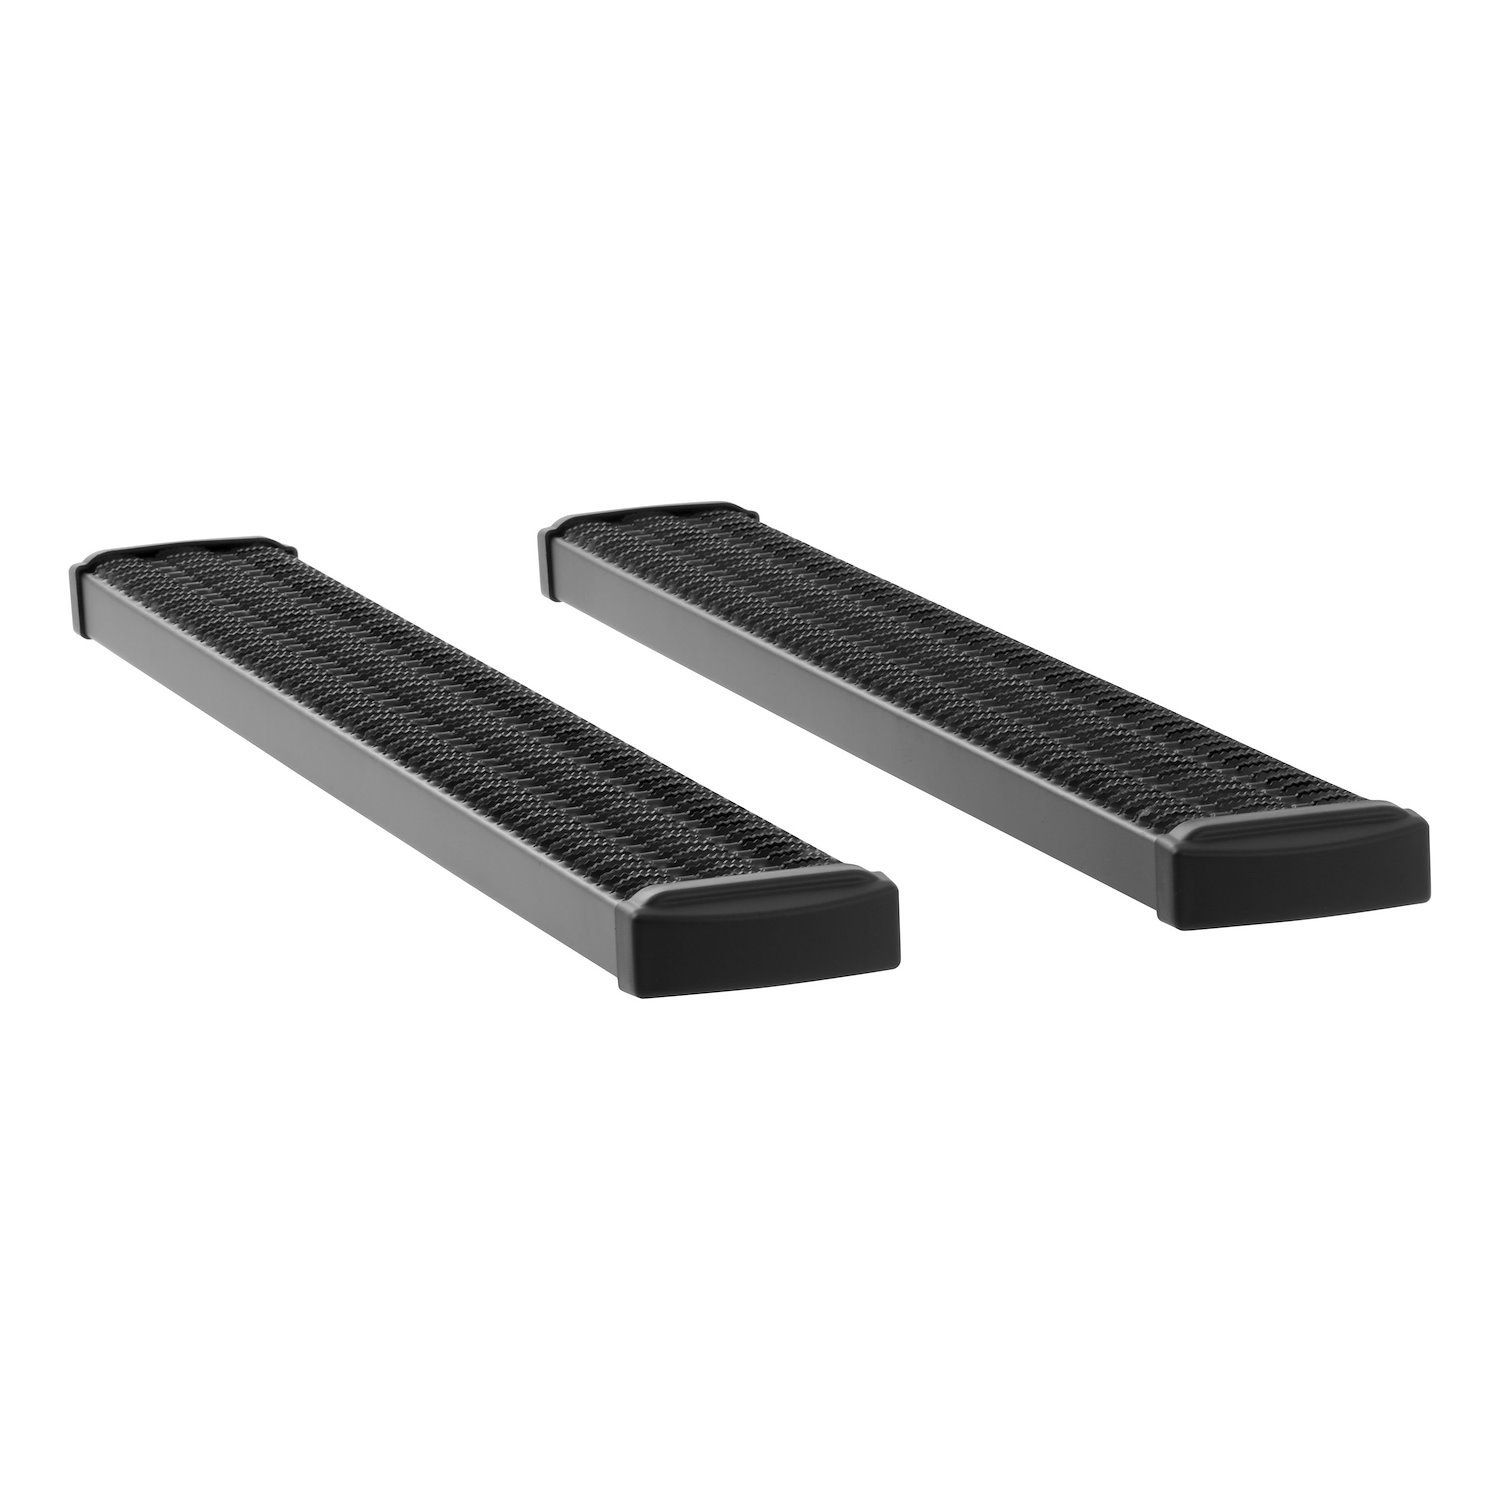 415060-401521 Grip Step 7 in. x 60 in. Black Aluminum Running Boards Fits Select Ford F-150